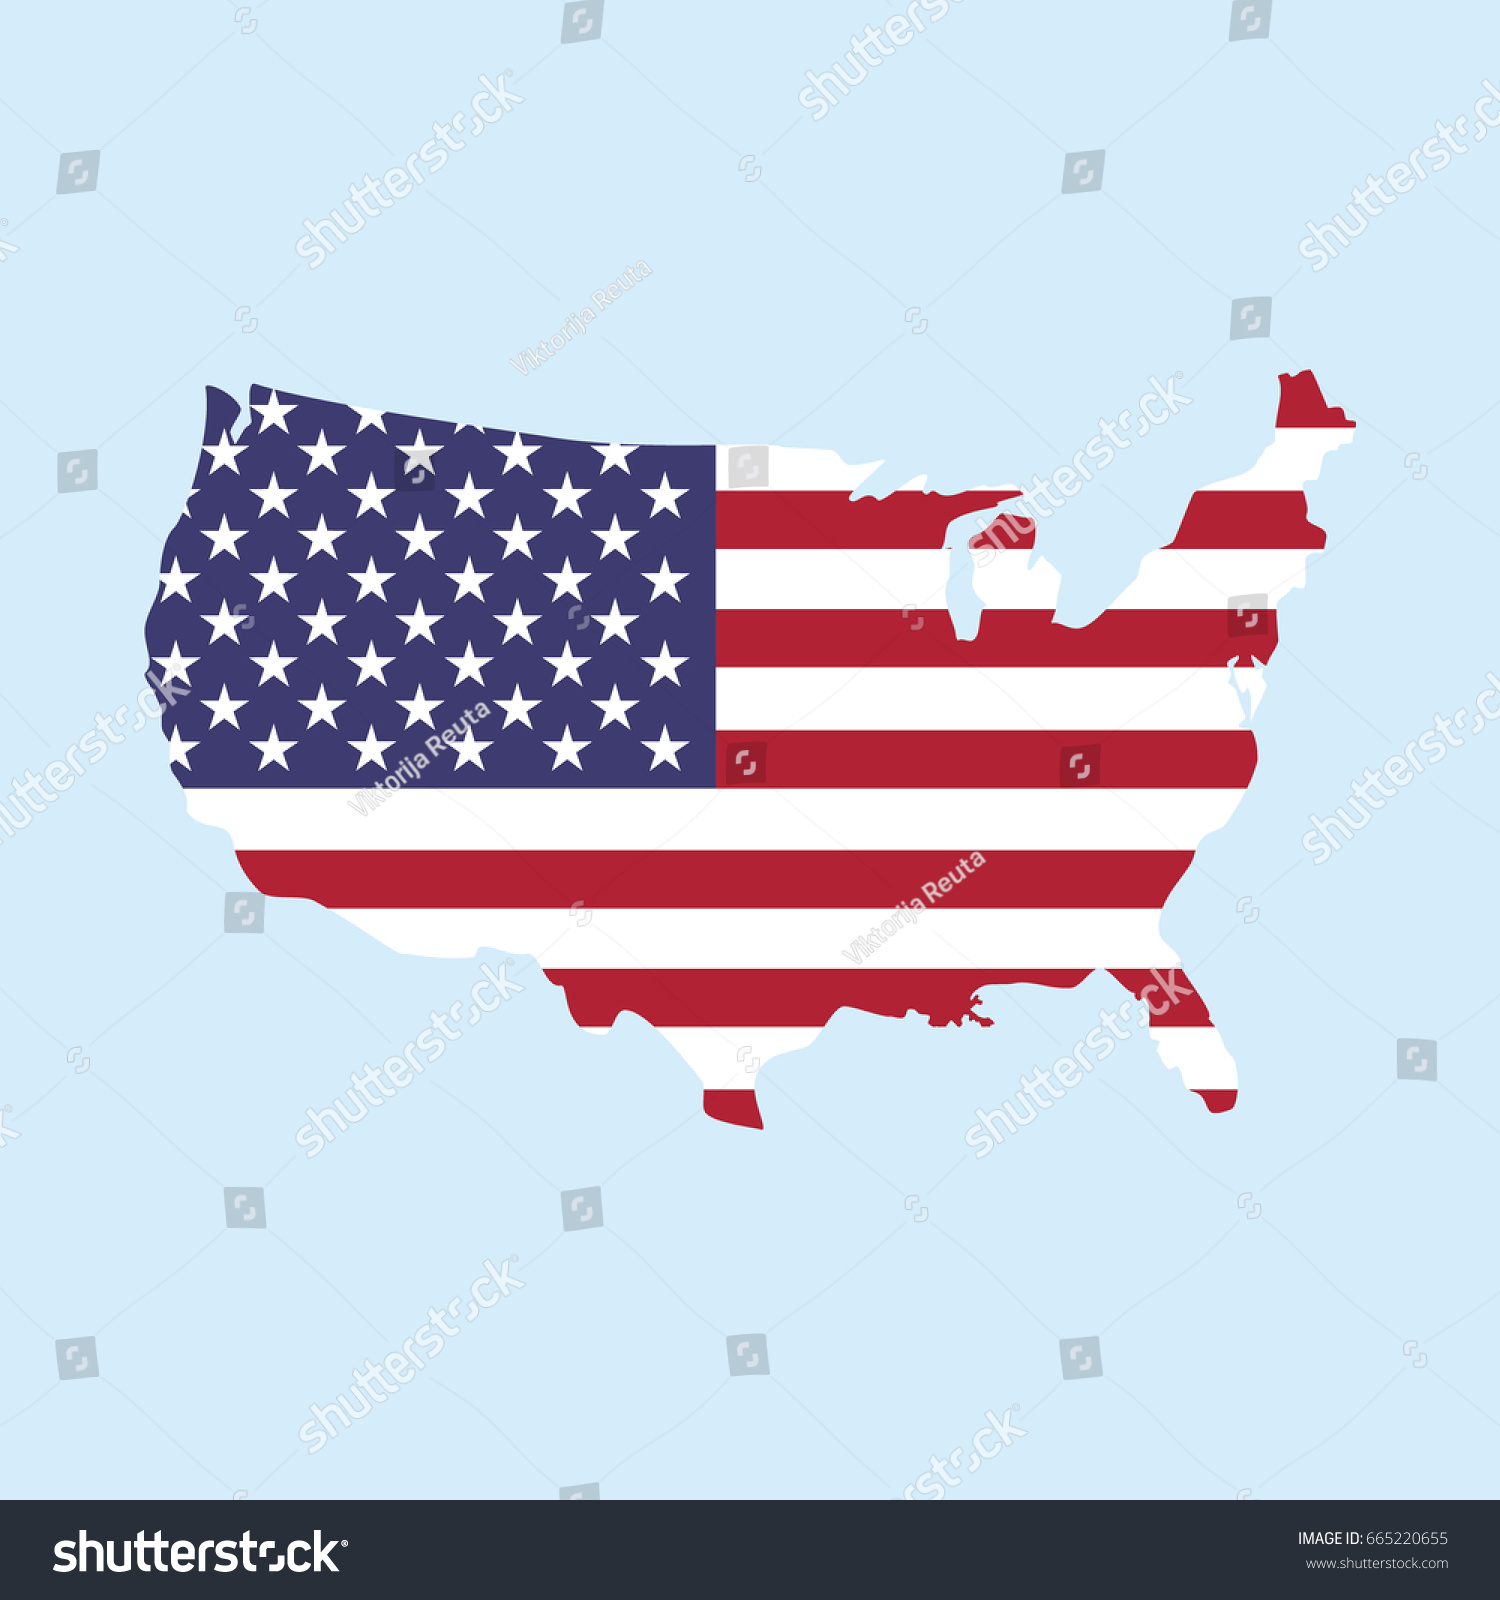 Vector Illustration Map Of United States Of Royalty Free Stock Vector 665220655 8986